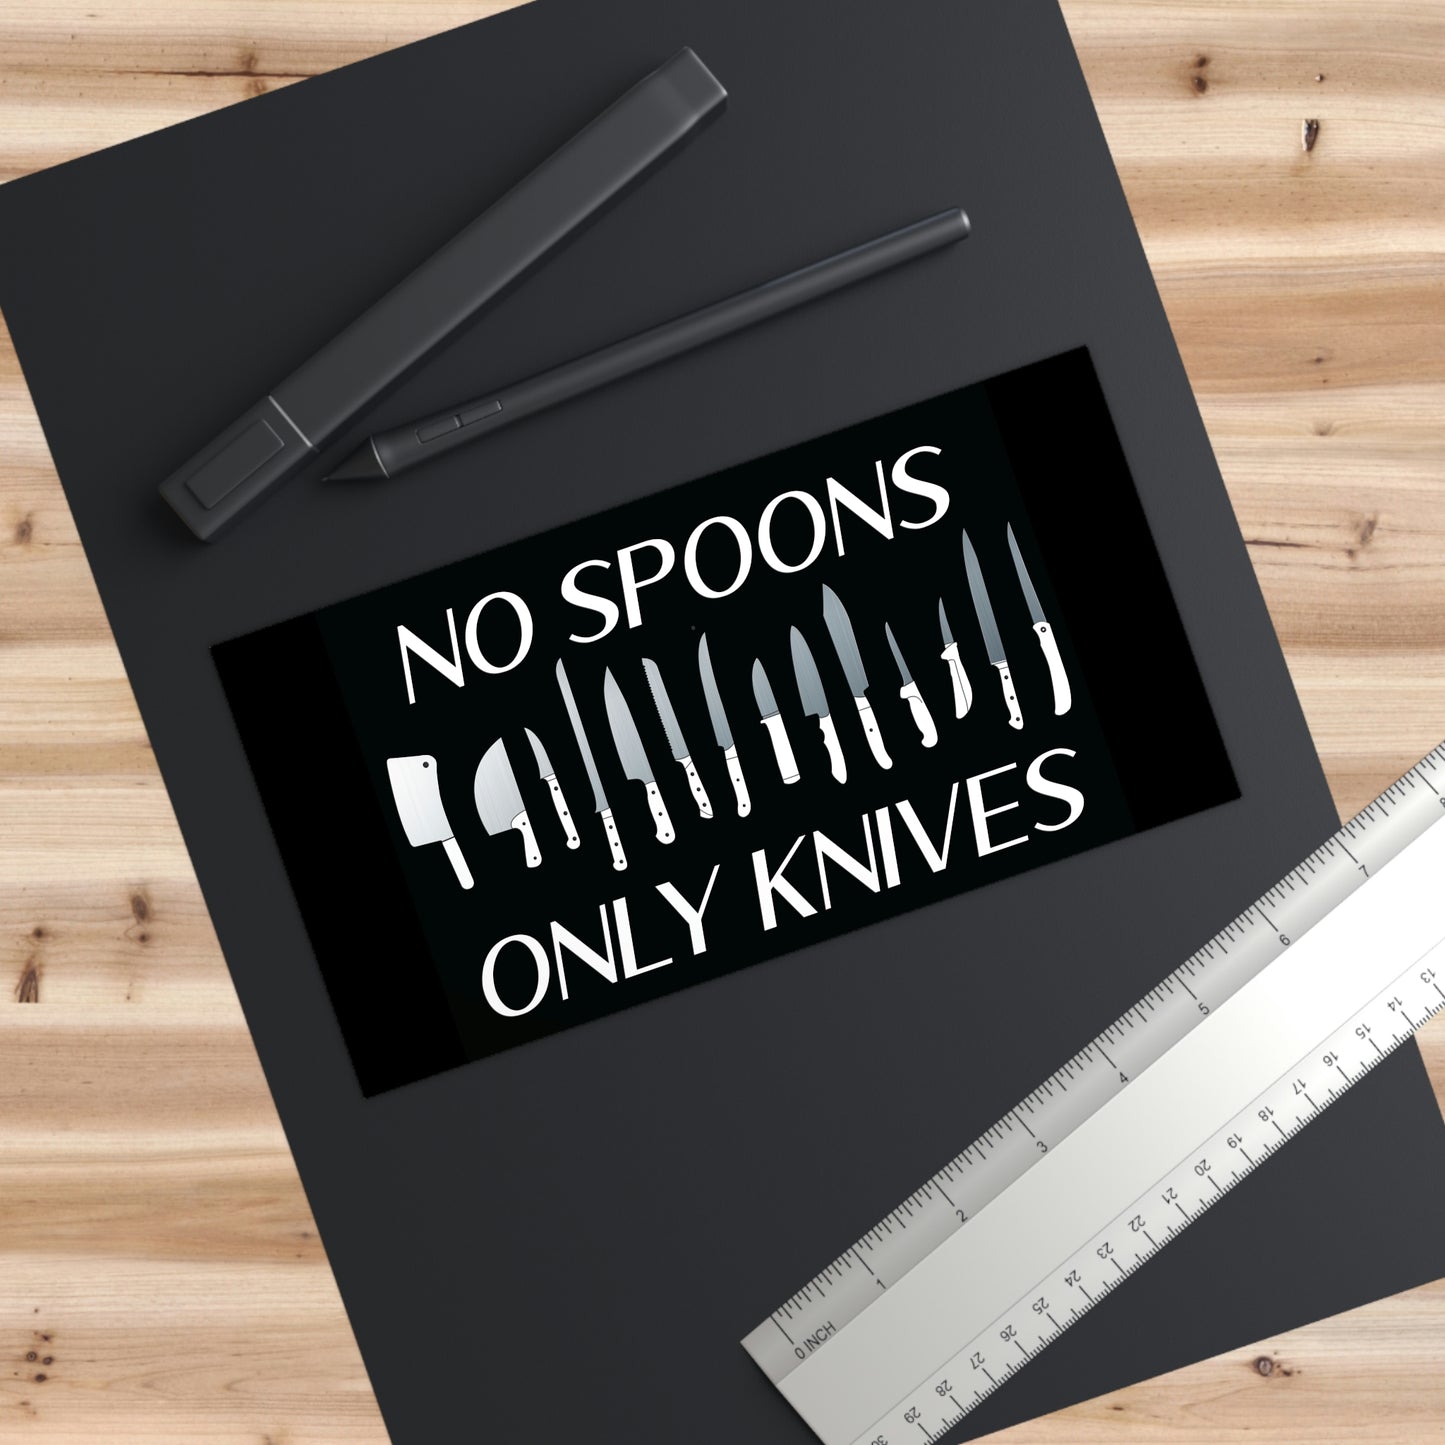 No Spoons, Only Knives Bumper Sticker